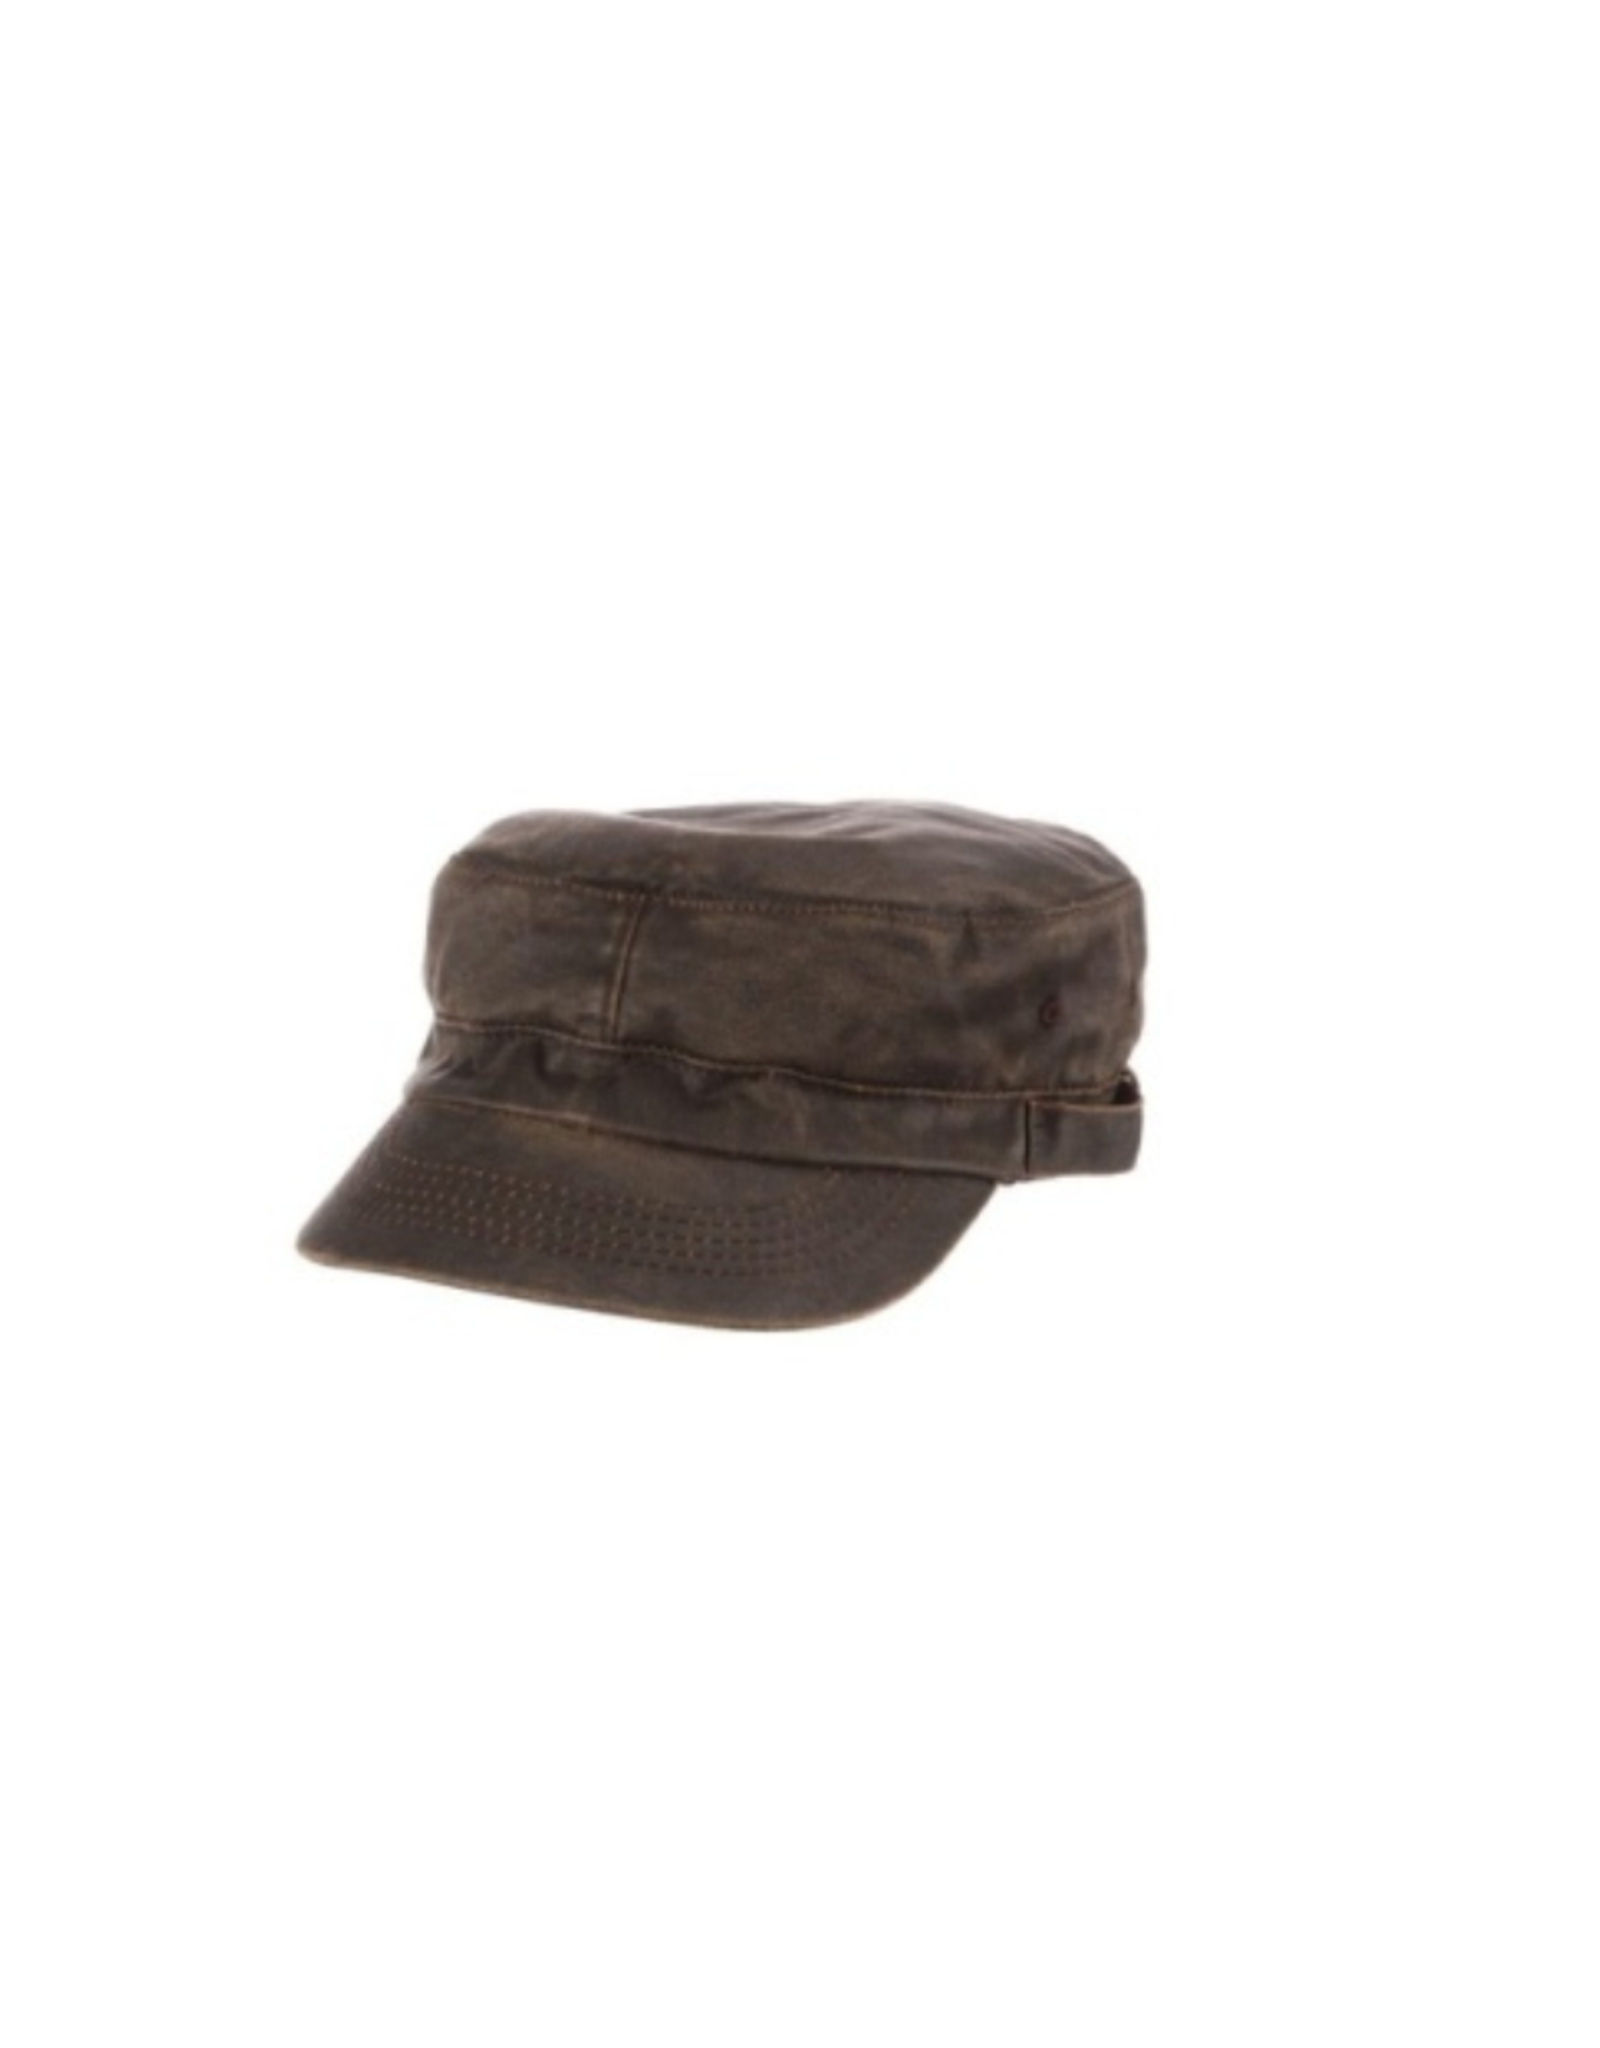 HAT-CAP-CADET "AMERICAN HOLLY" WEATHERED COTTON